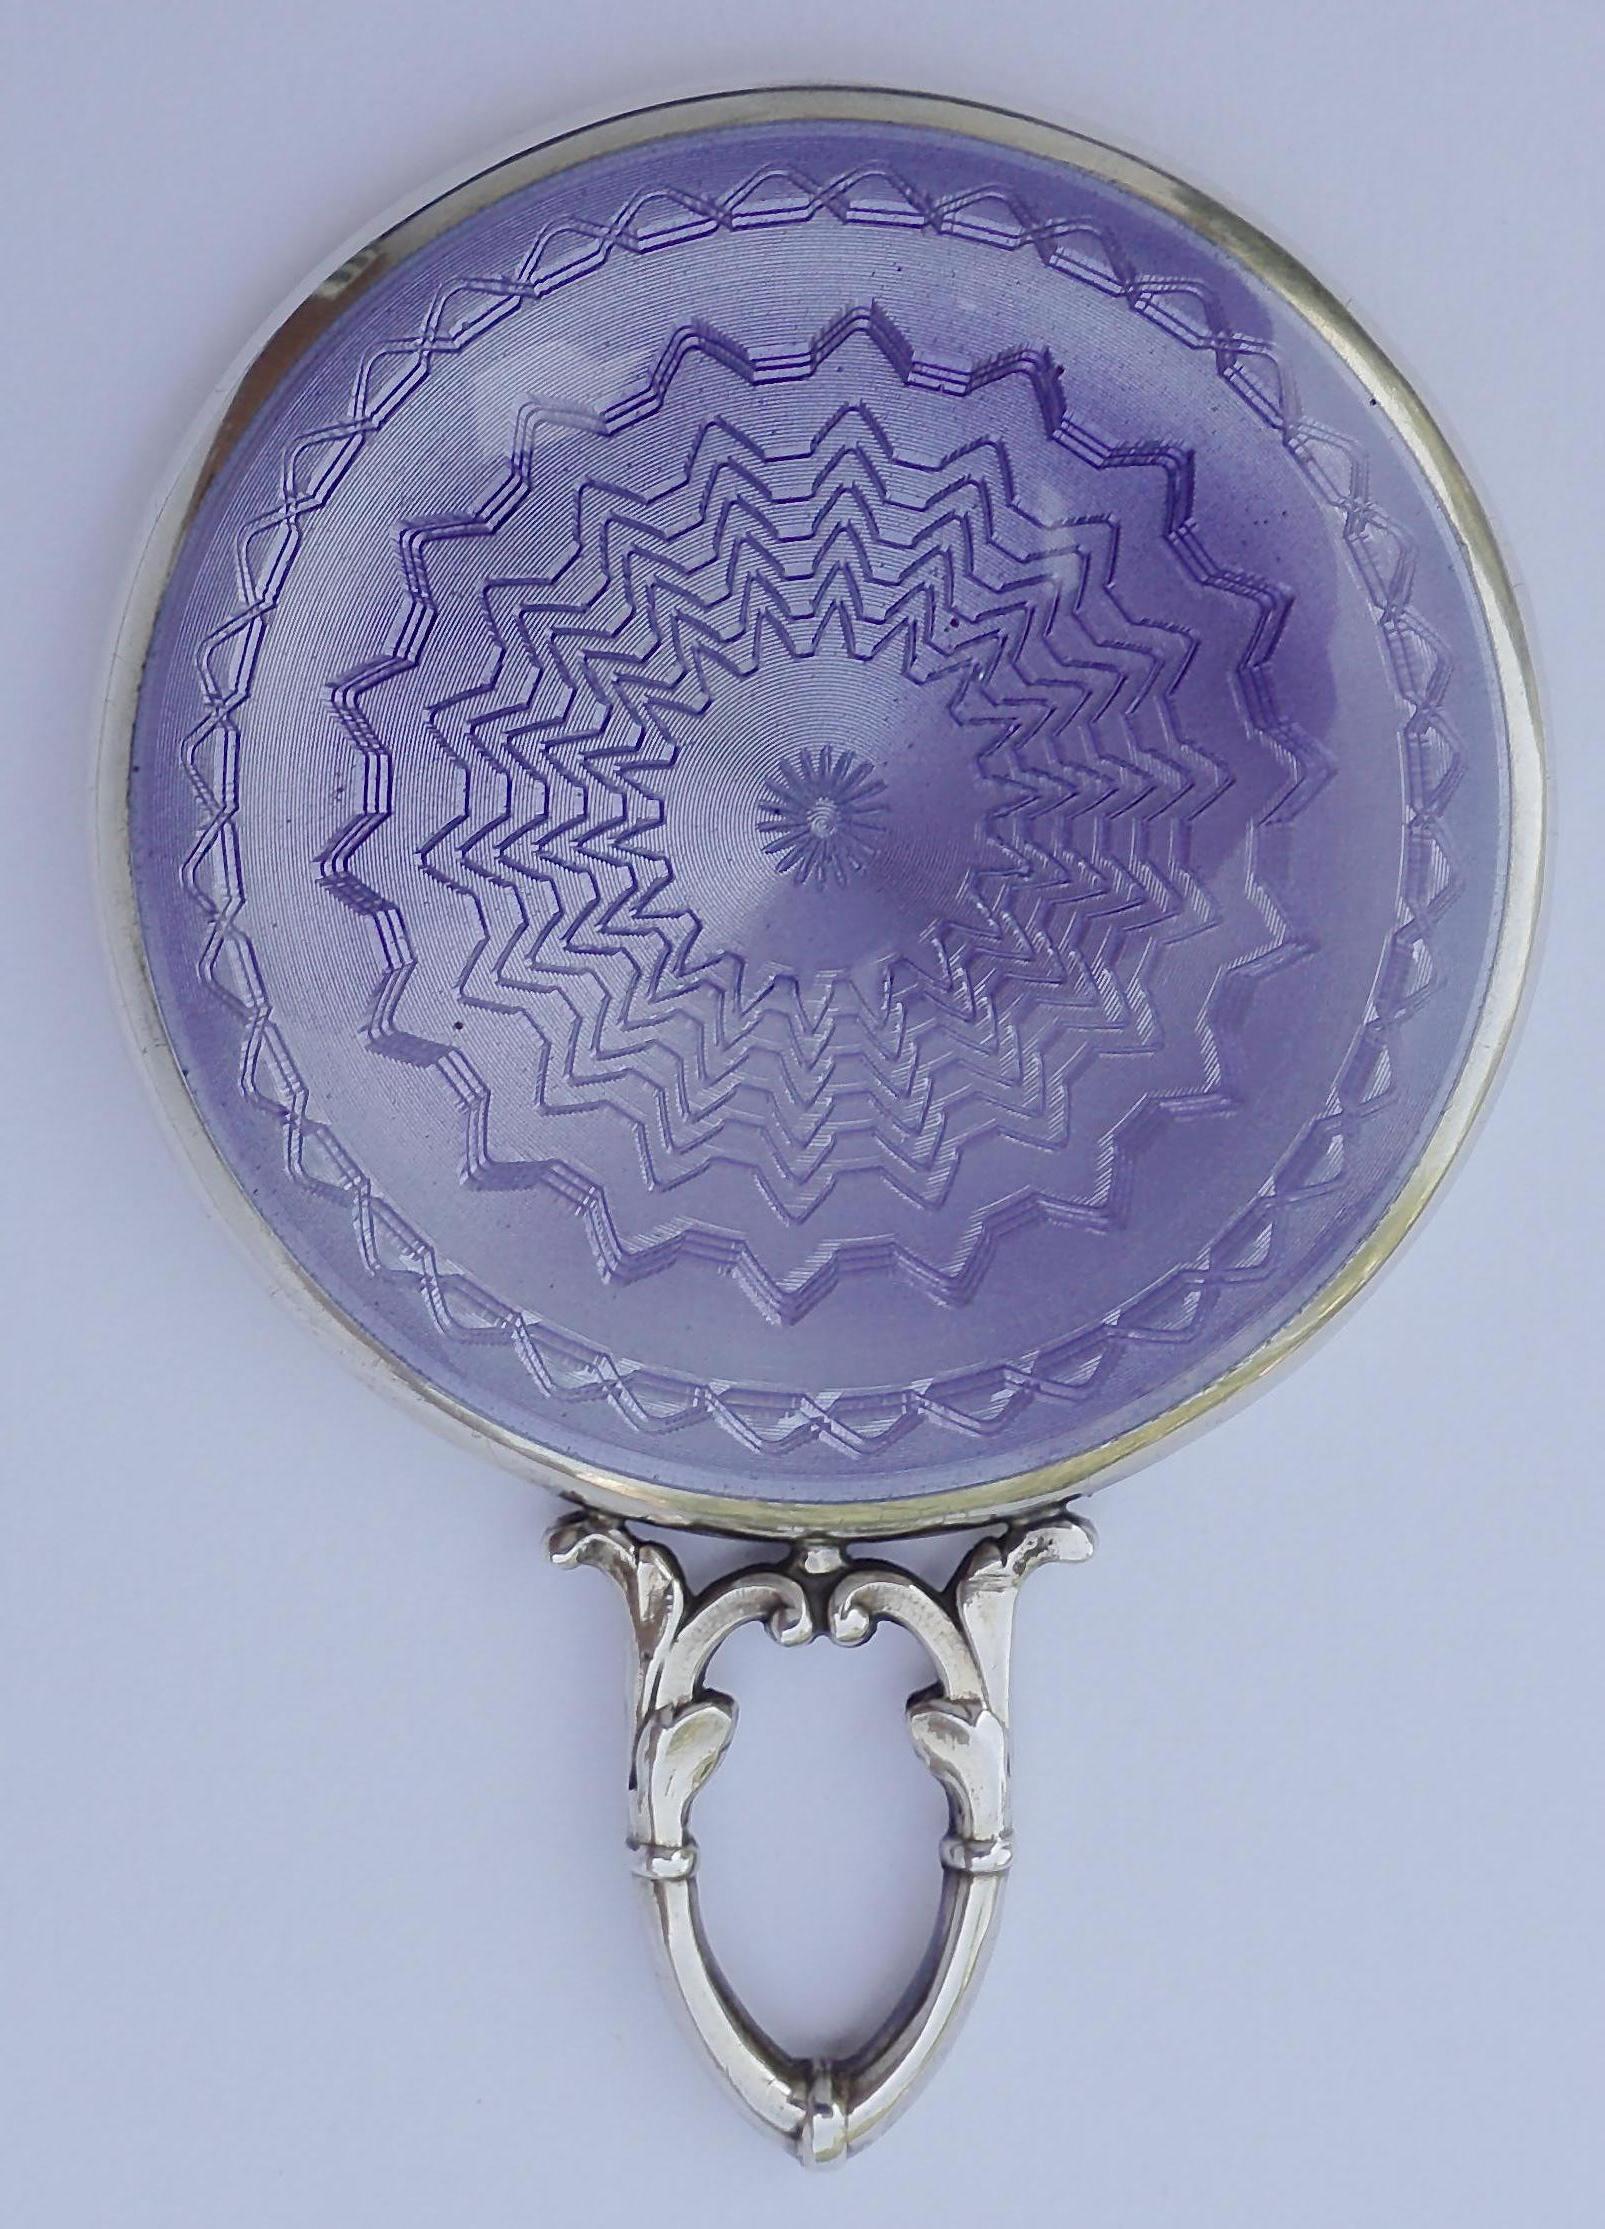 Art Deco sterling silver comb and mirror featuring lilac enamel guilloché work. The comb and mirror fit in the original purple leather case, which is fully lined and has separate compartments for the mirror and comb. The case closes with a metal